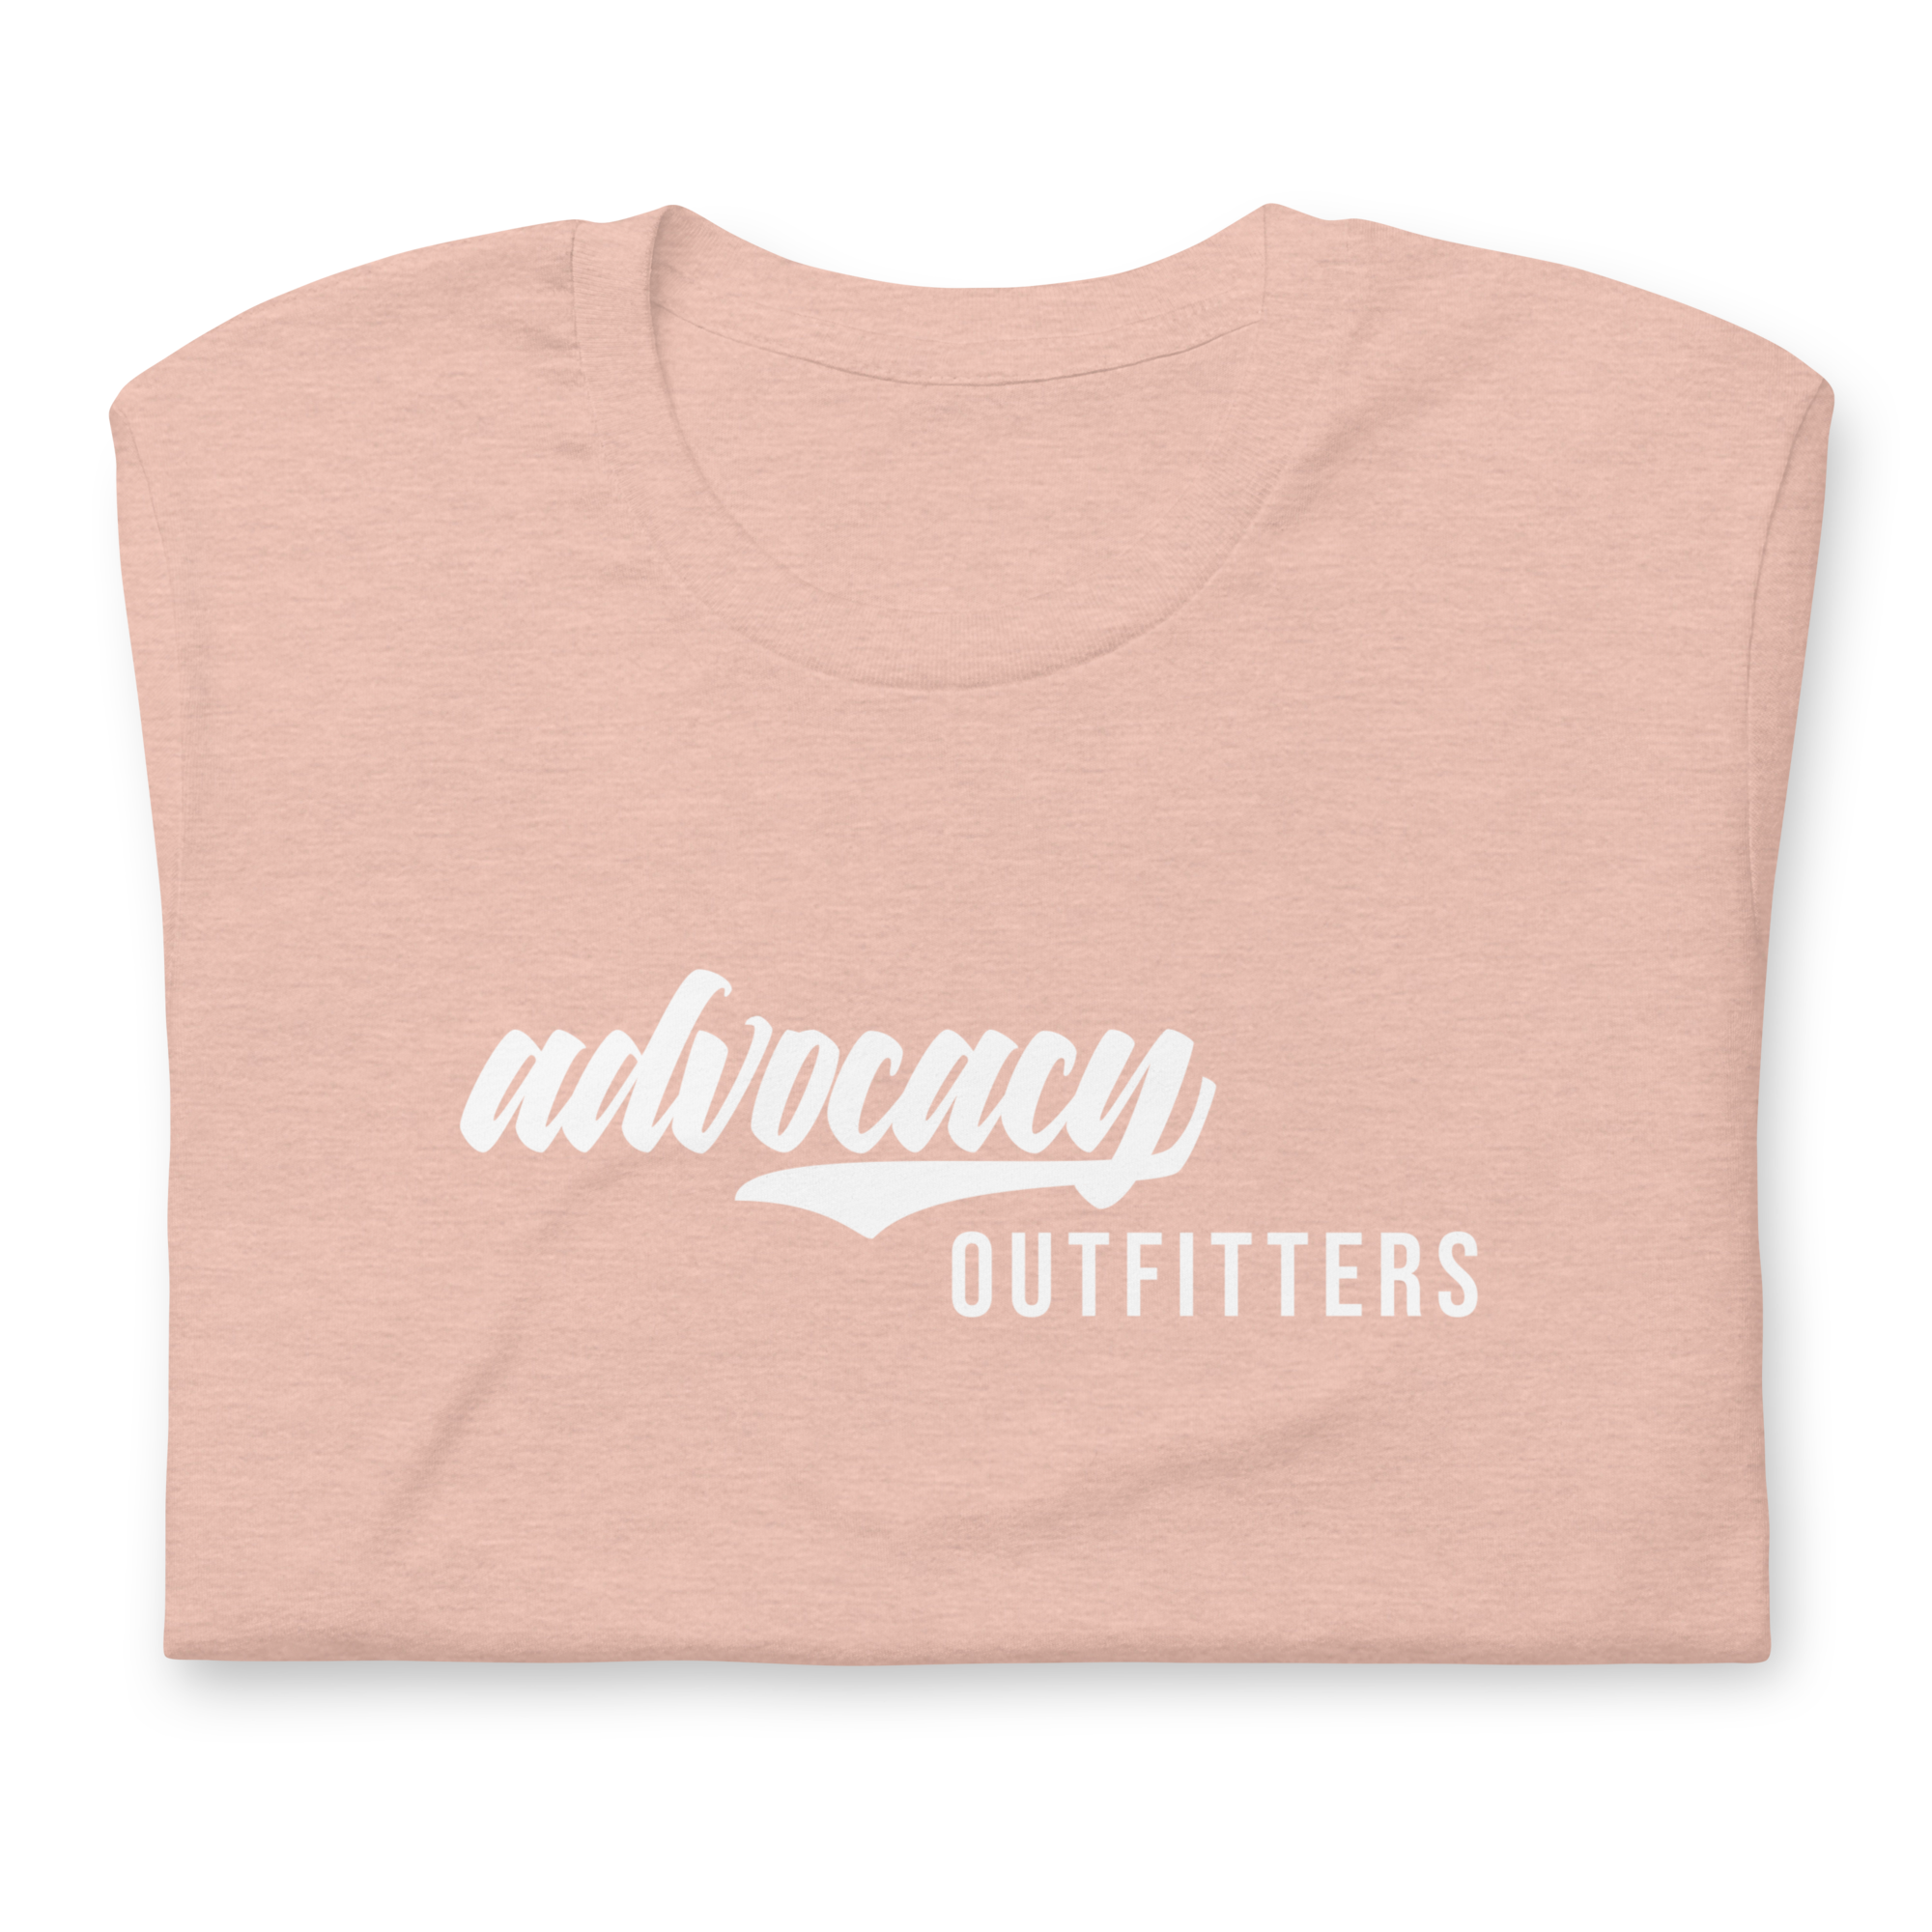 Advocacy Outfitters Vintage T-shirt